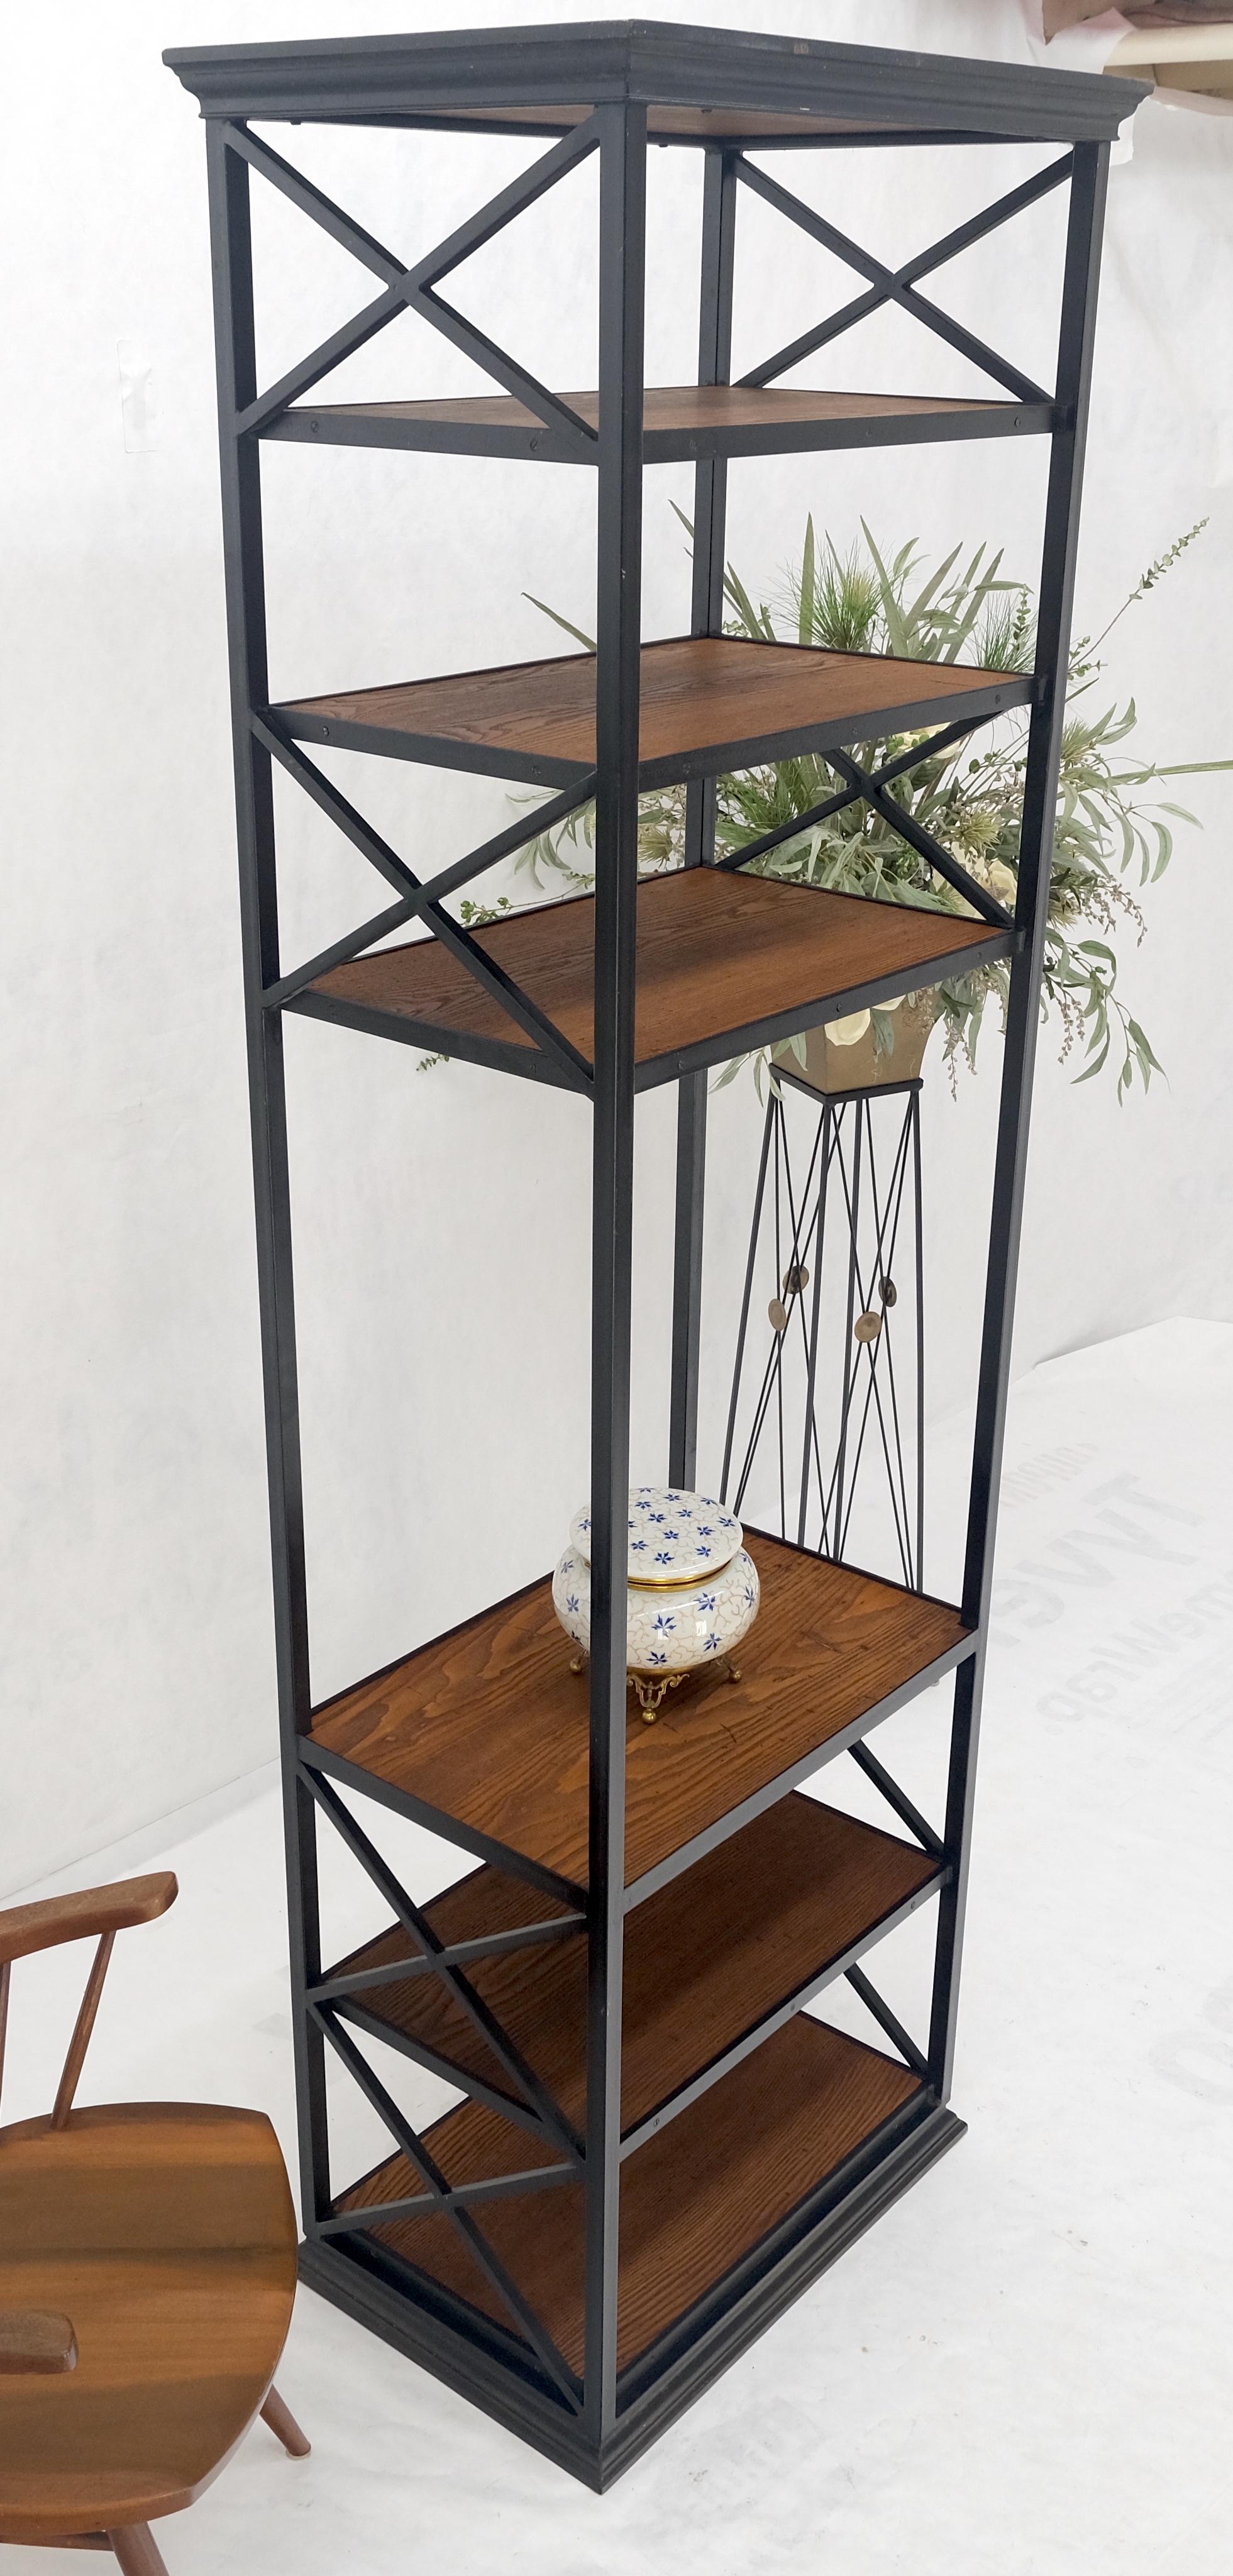 Black Steel & Wormy Chestnut Shelves 8 Foot Tall Etagere BookCase Display MINT For Sale 1